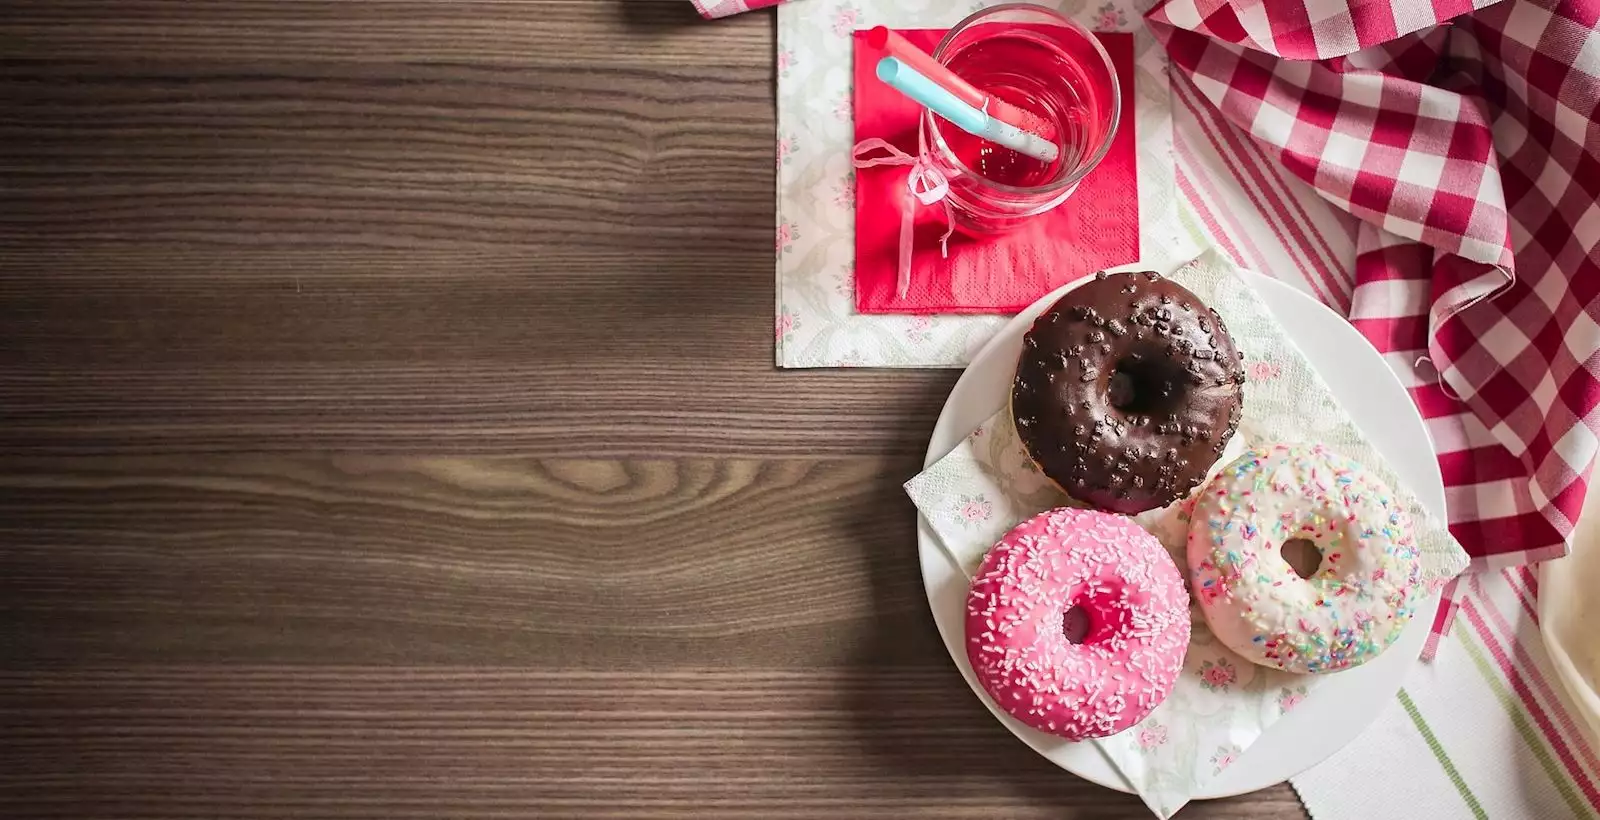 How did donuts in Belgrade become synonymous with the most beautiful gift?